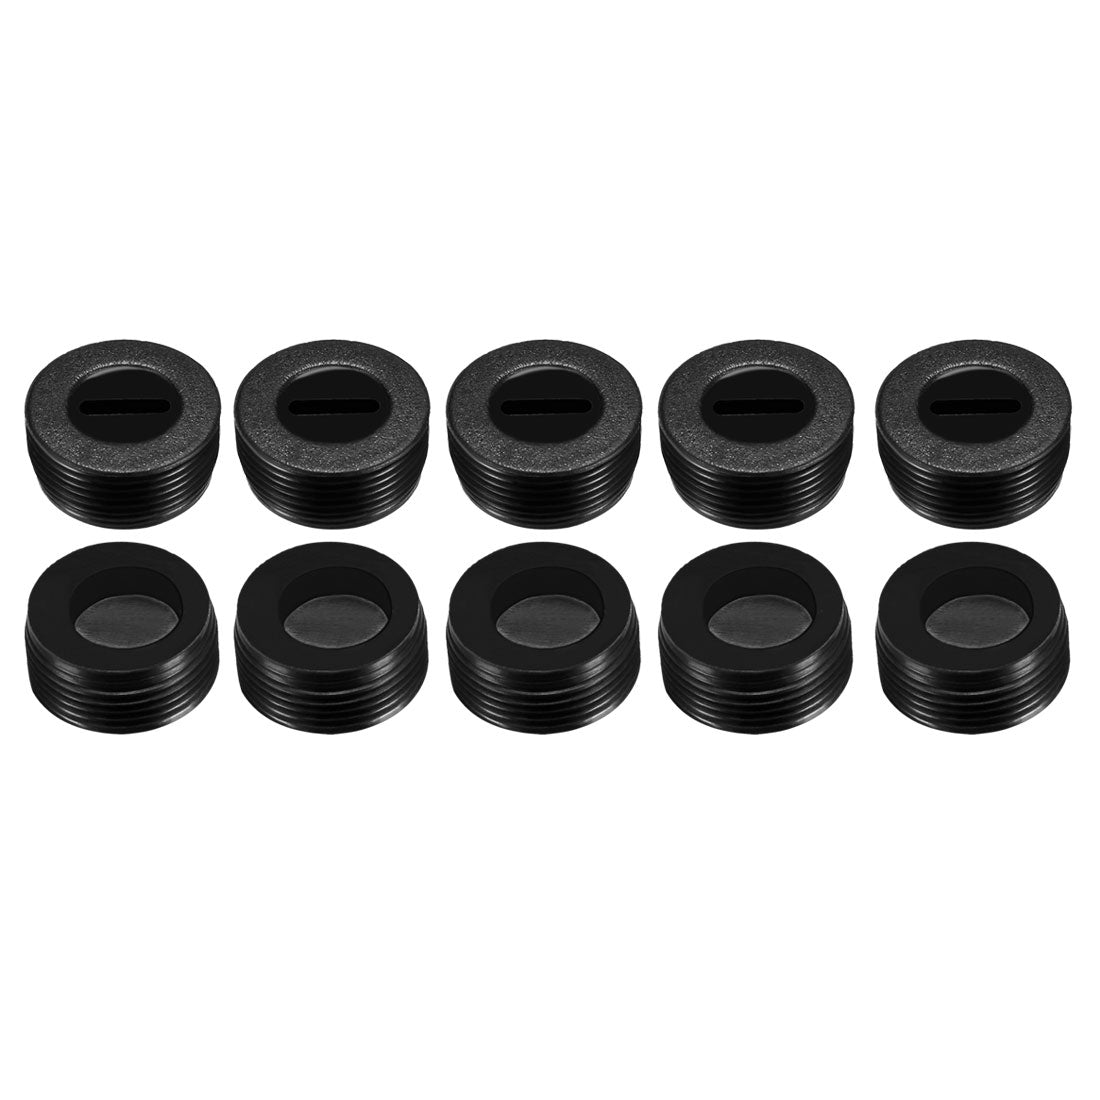 uxcell Uxcell Carbon Brush Holder Caps 17mm O.D. 9mm I.D. 7.7mm Thickness Motor Brush Cover Plastic Fitting Thread Black 10pcs